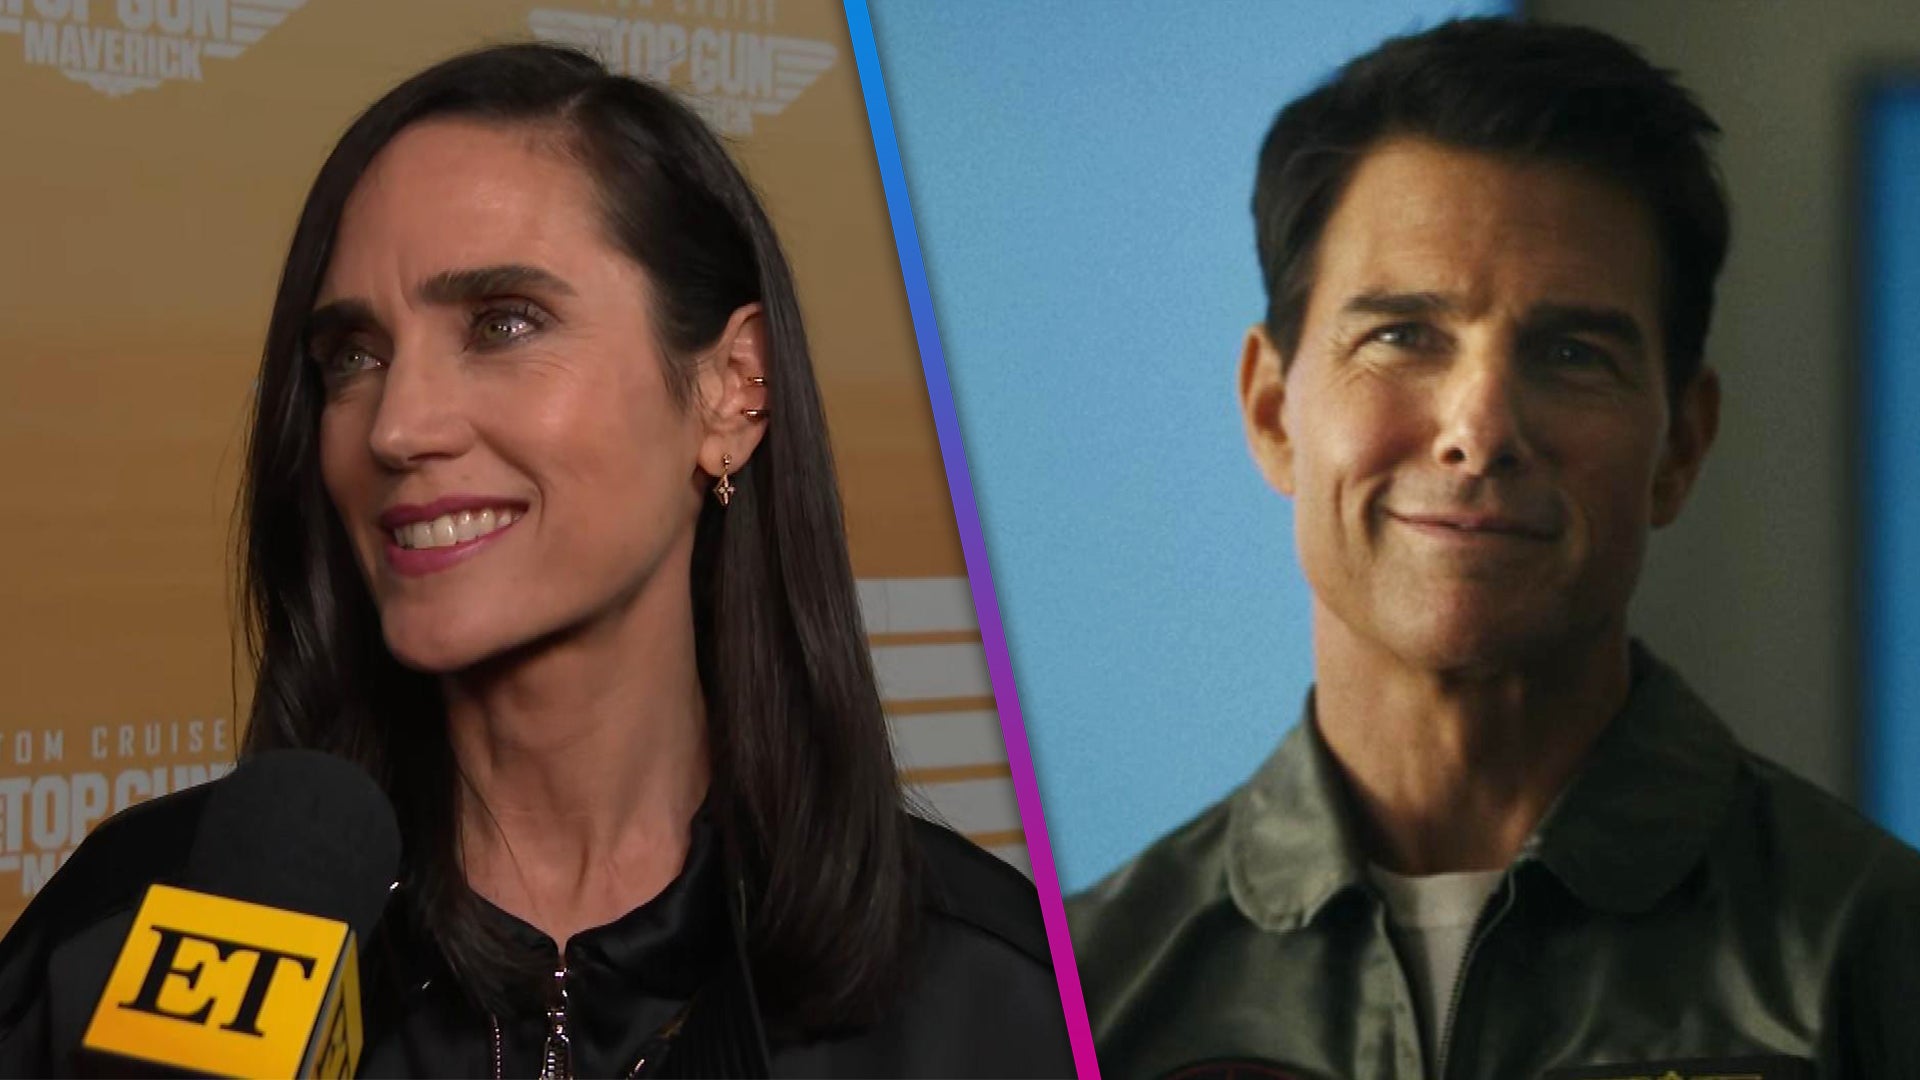 Top Gun Tom Cruise is finally acting his age with Jennifer Connelly, Celebrity News, Showbiz & TV